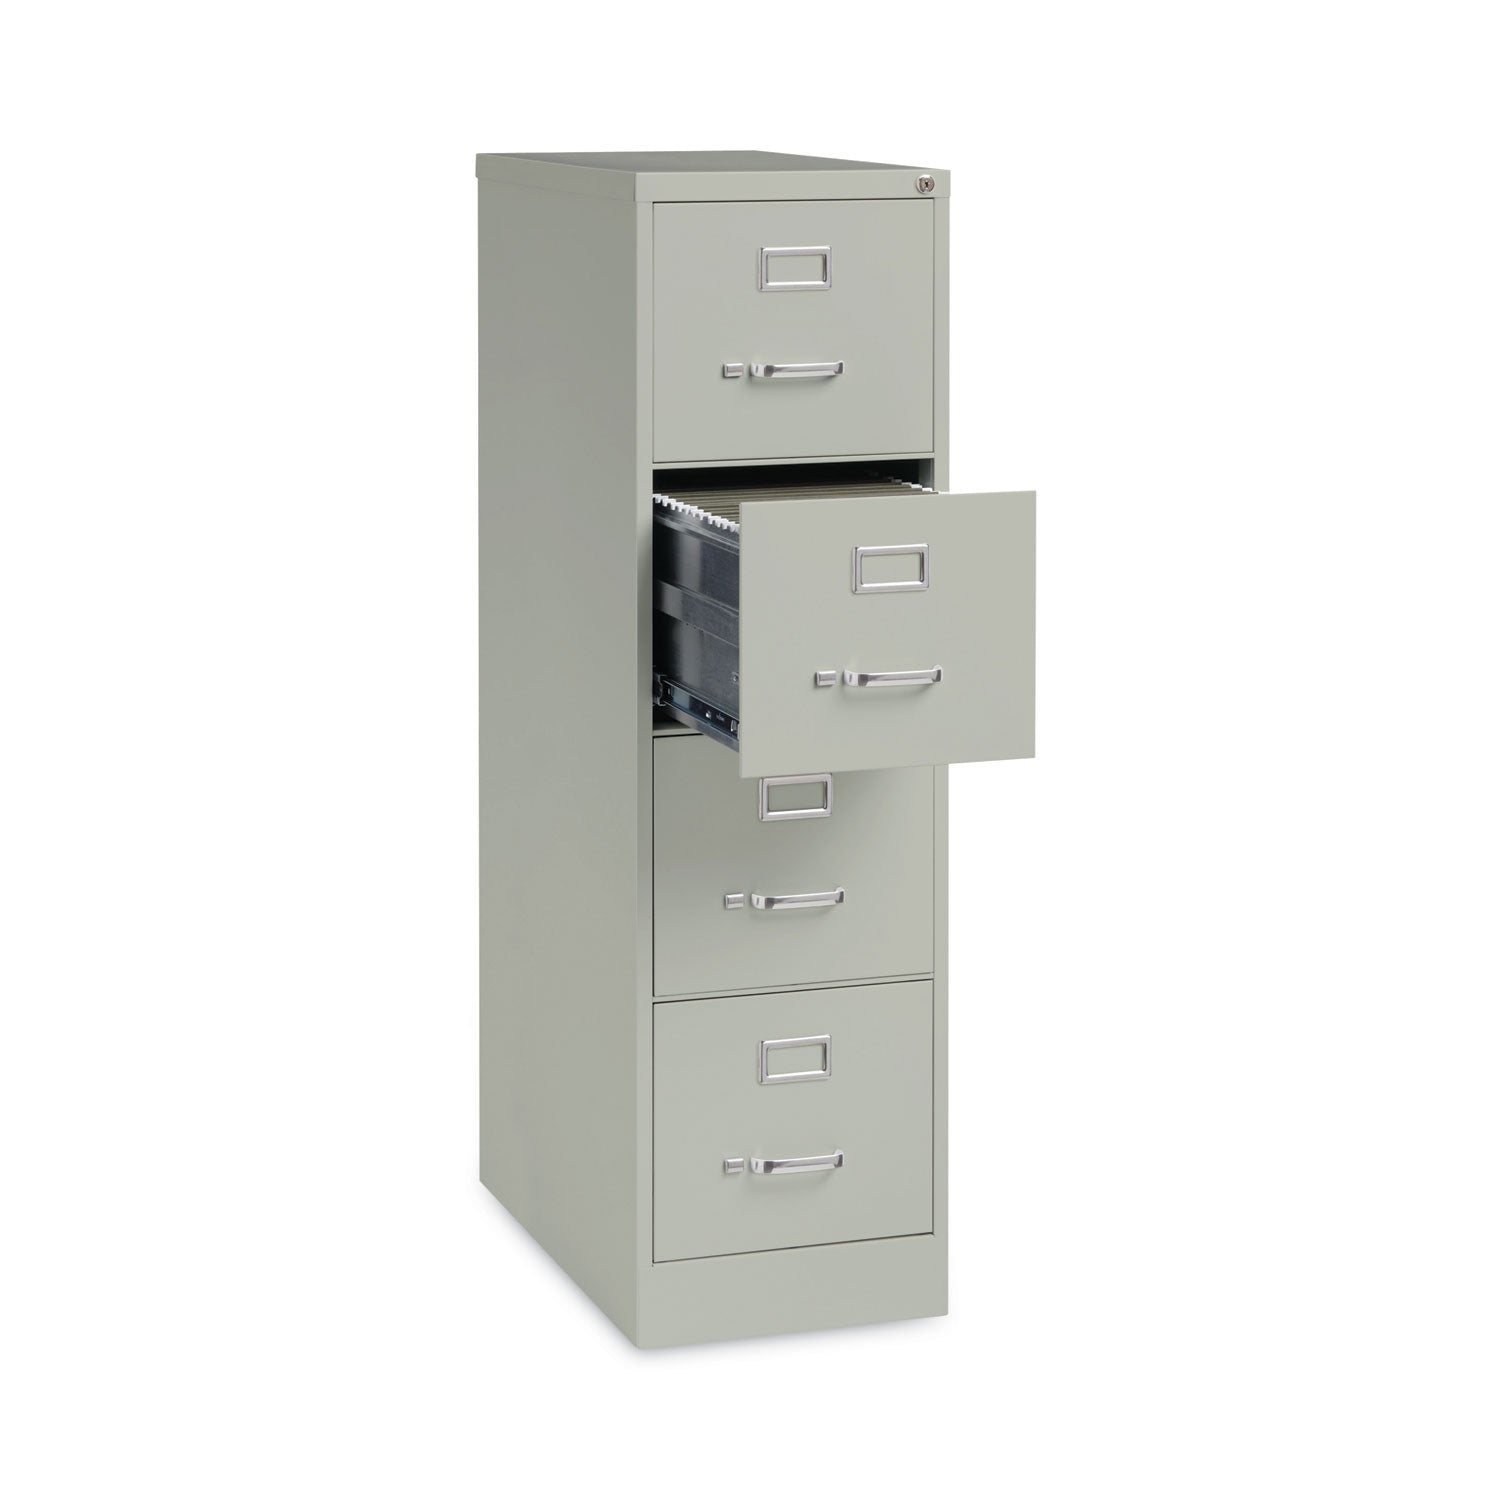 vertical-letter-file-cabinet-4-letter-size-file-drawers-light-gray-15-x-265-x-52_hid14029 - 3